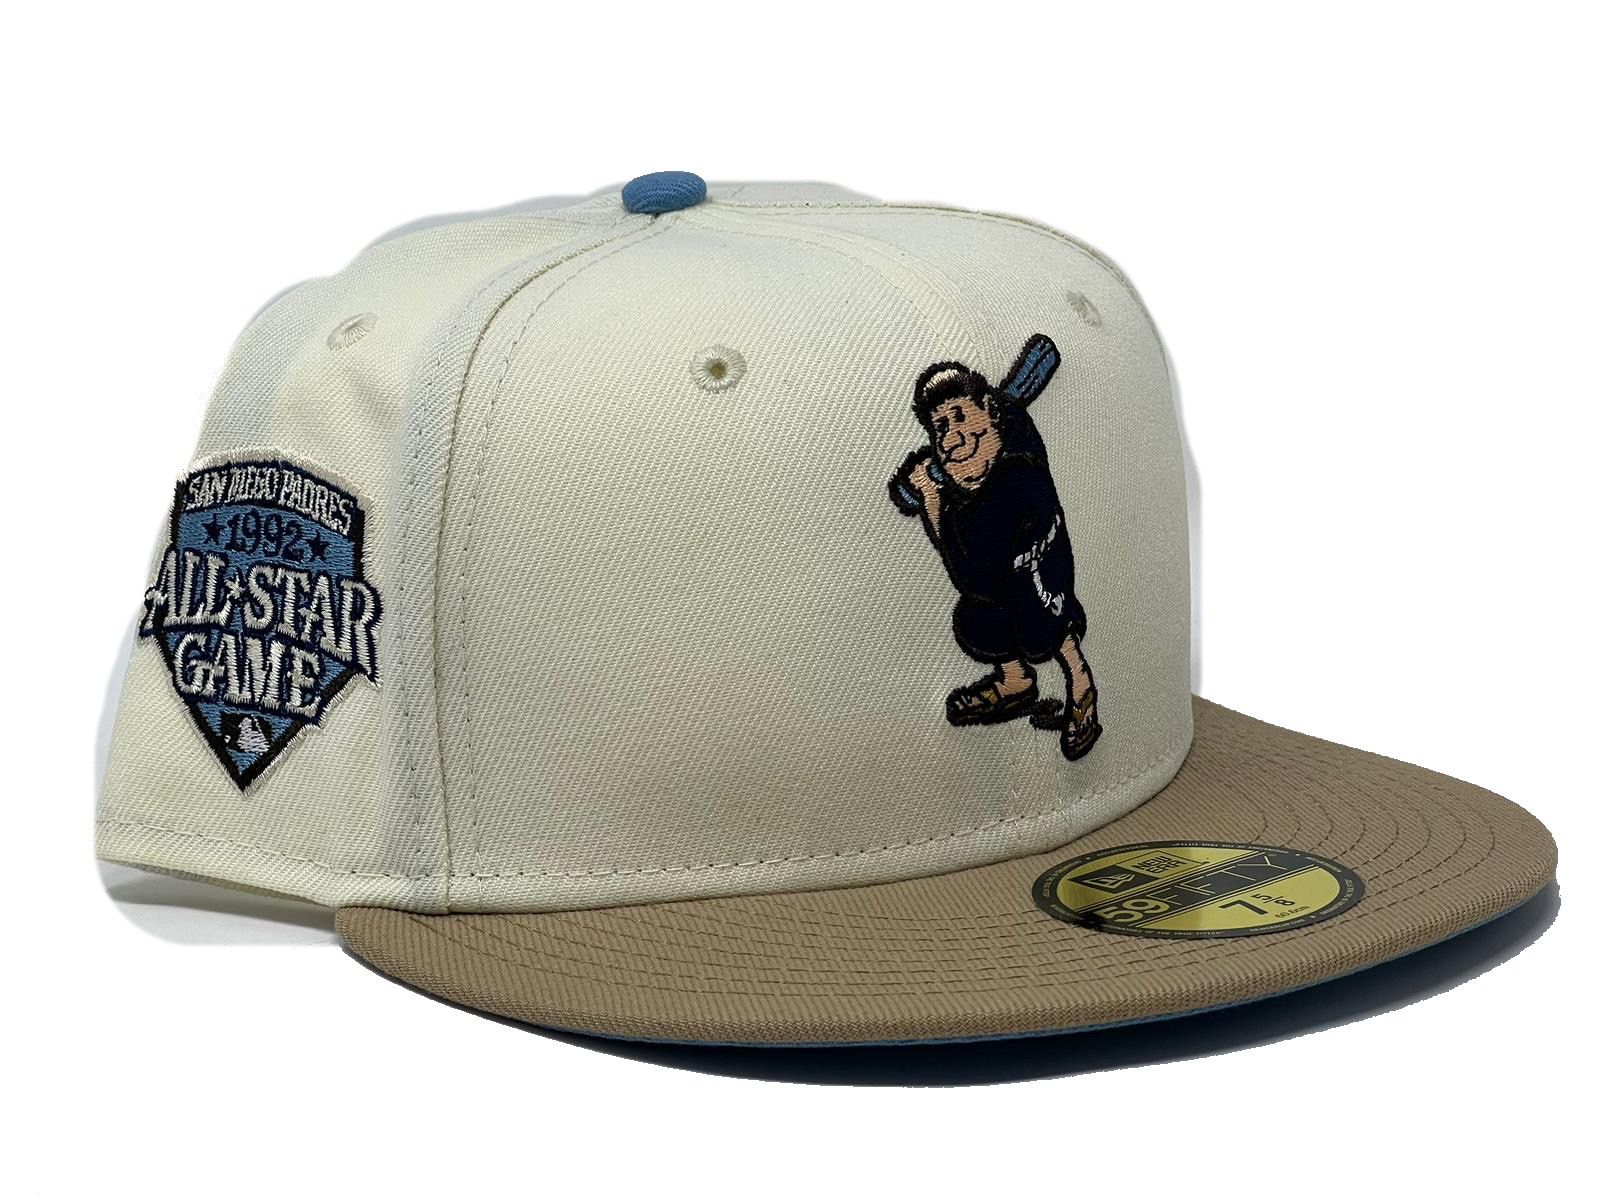 SAN DIEGO PADRES 1992 ALL STAR GAME SKY BLUE BRIM NEW ERA FITTED 